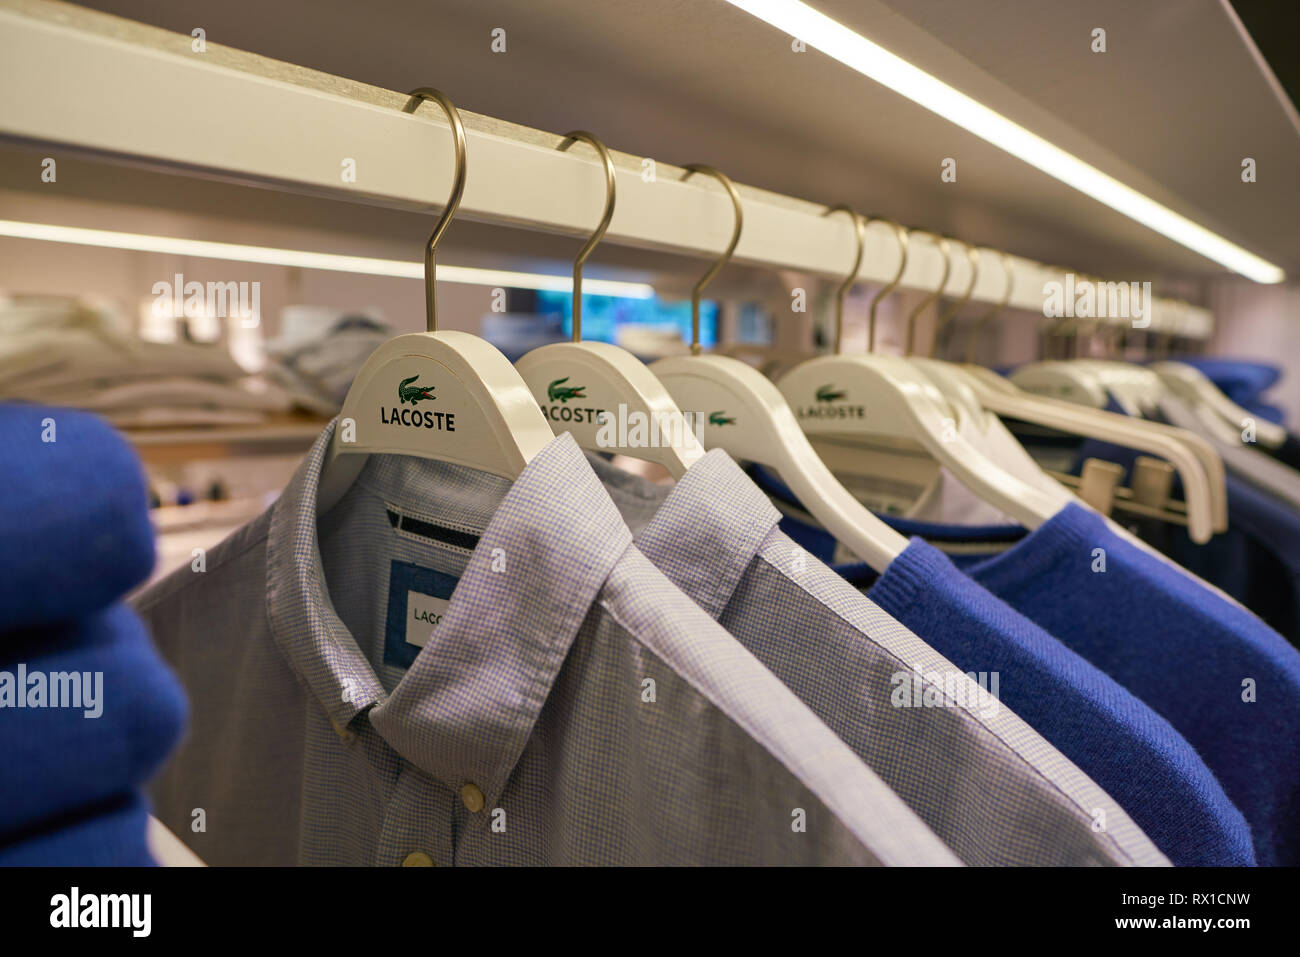 DUSSELDORF, GERMANY - CIRCA SEPTEMBER, 2018: Lacoste sign on clothes hanger  at Lacoste shop in Dusseldorf Stock Photo - Alamy